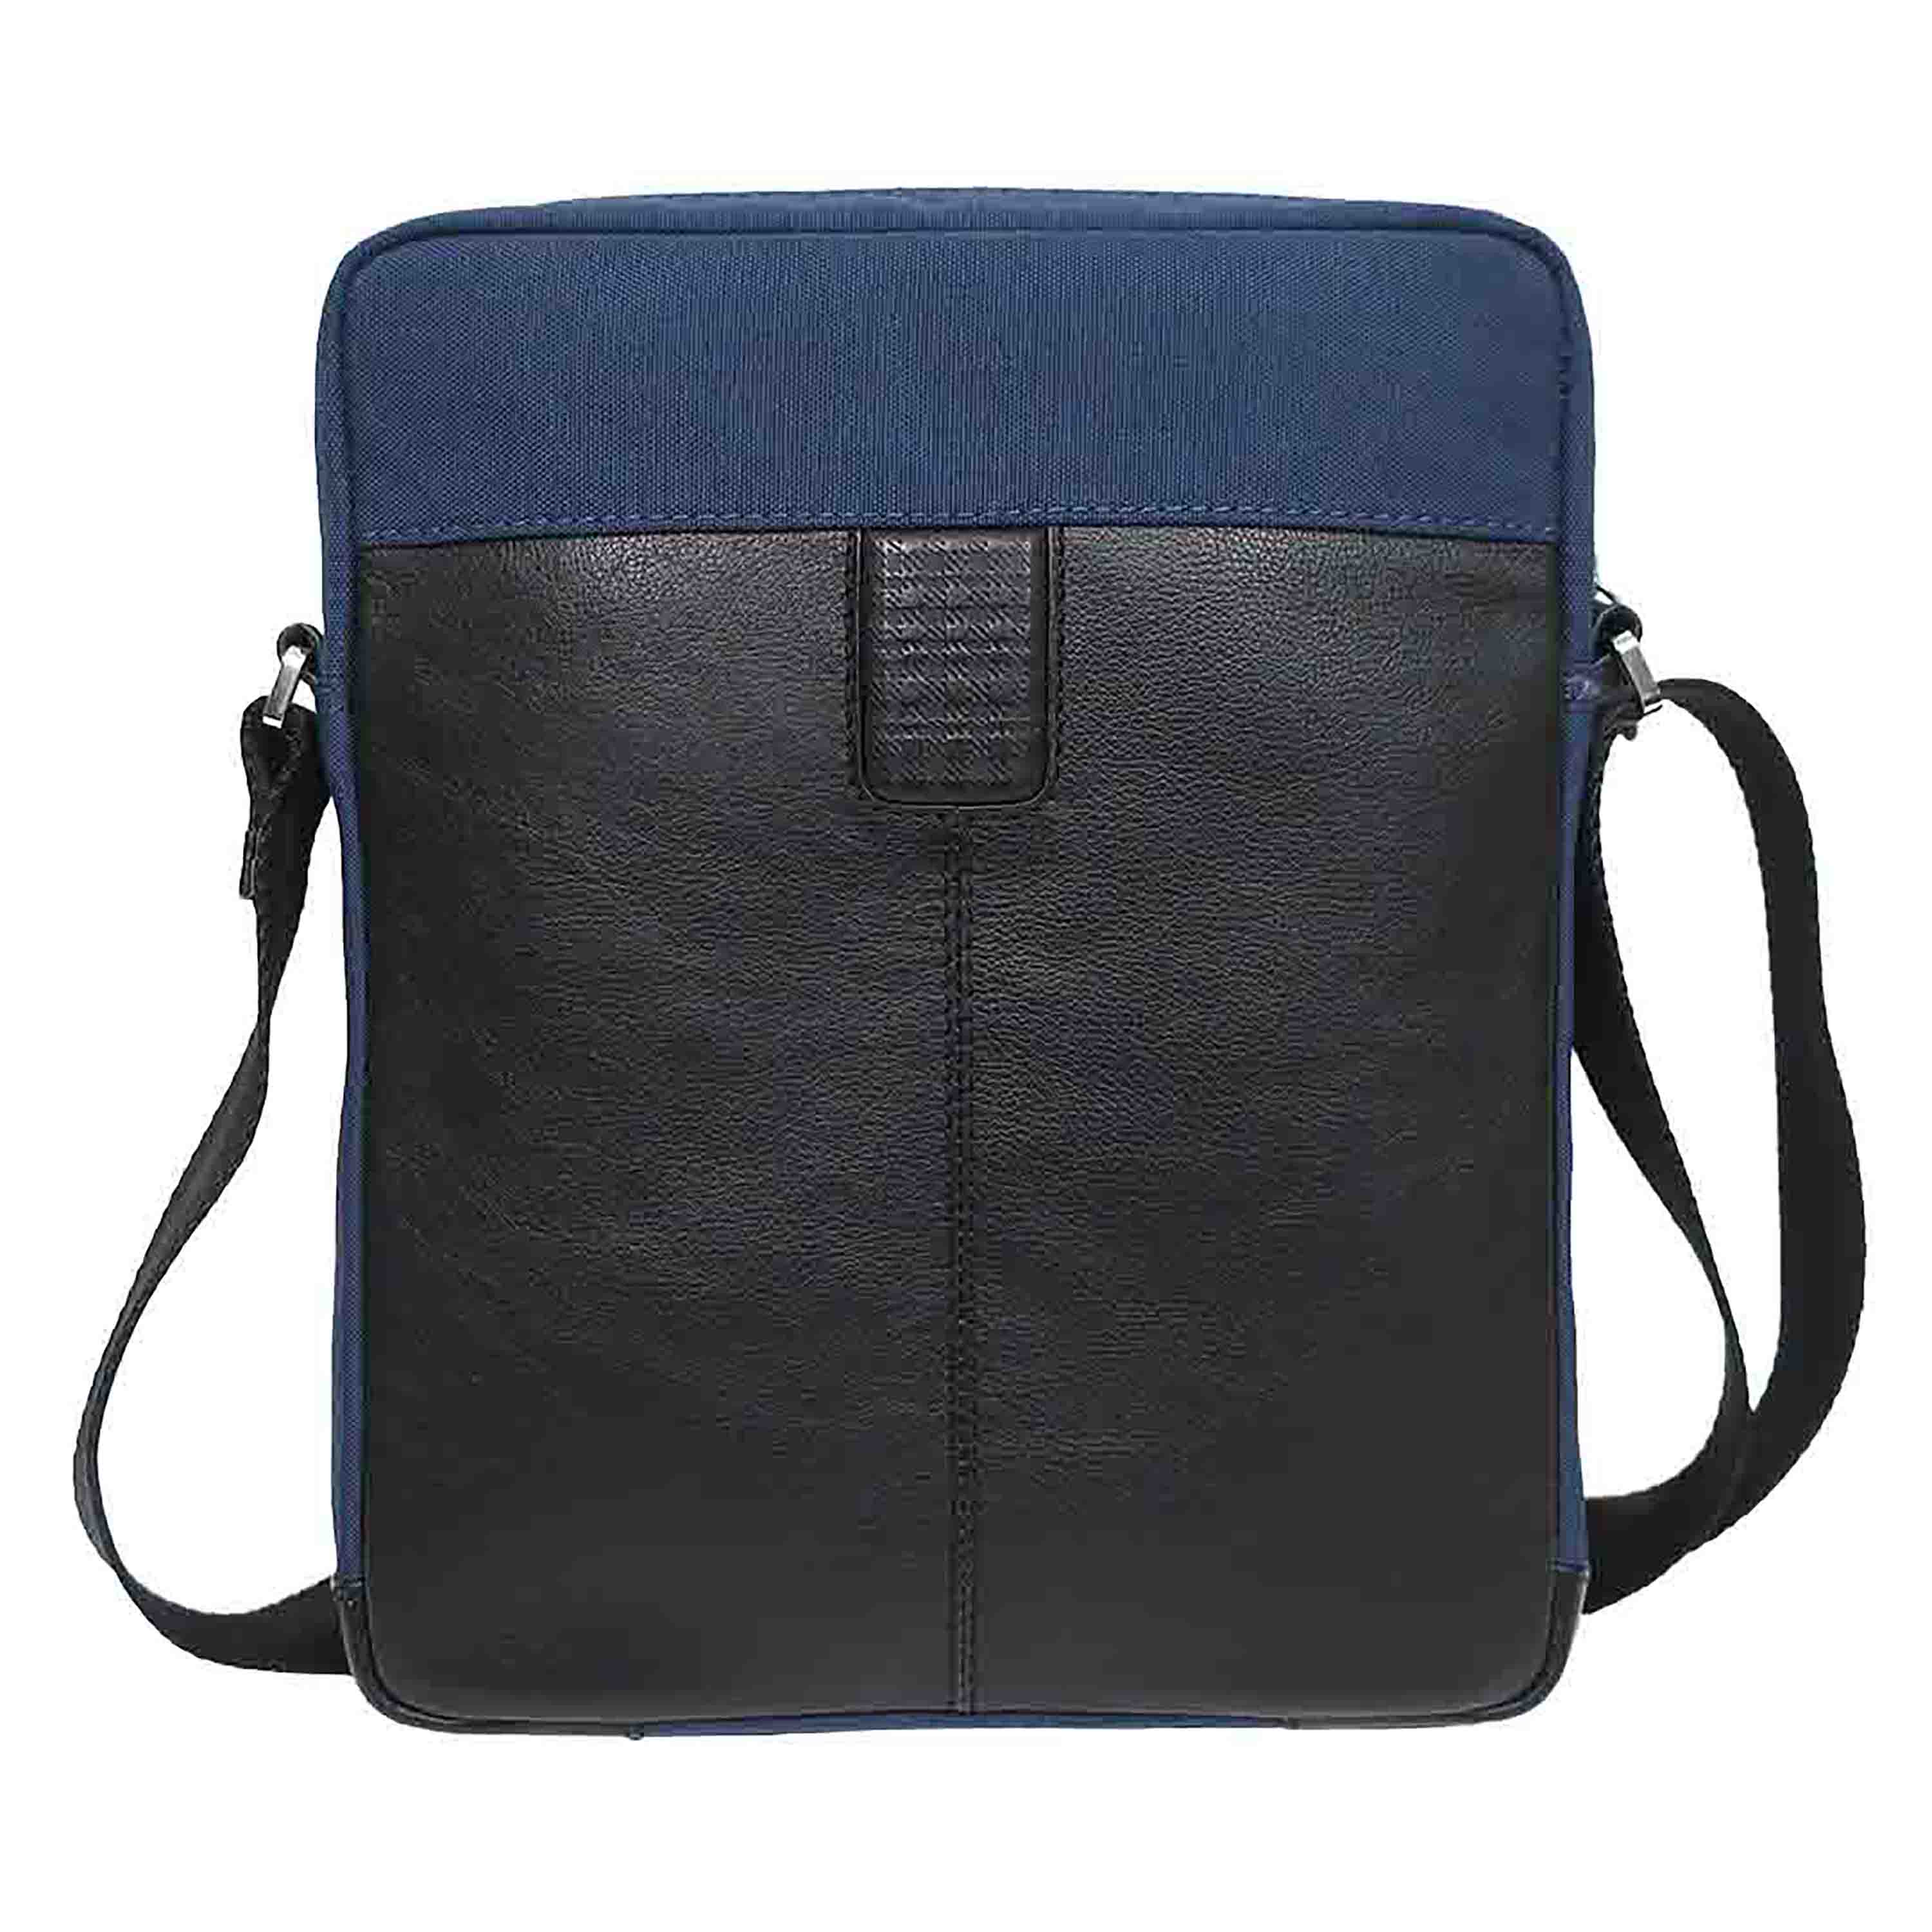 a black and blue leather crossbody bag